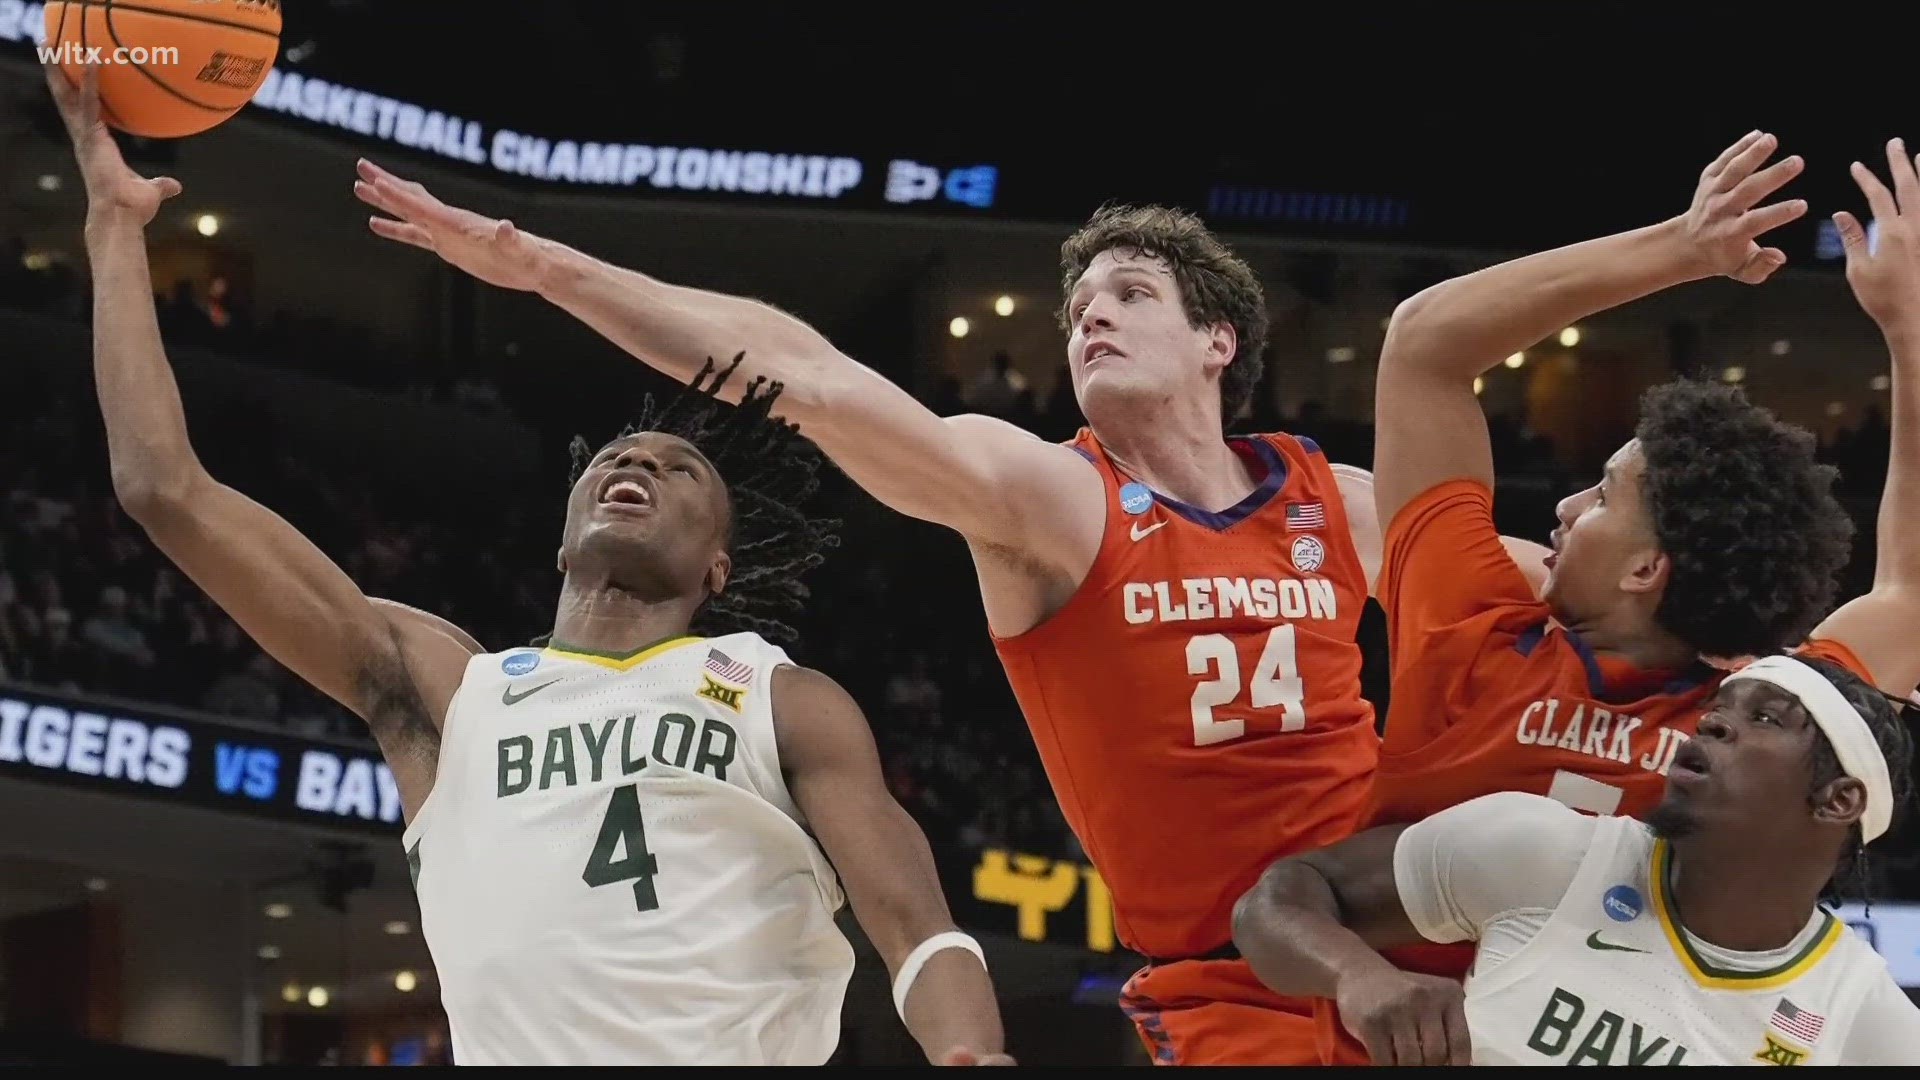 Clemson advances to the NCAA Sweet 16 for the second time in the Brad Brownell era with a 72-64 win over Baylor